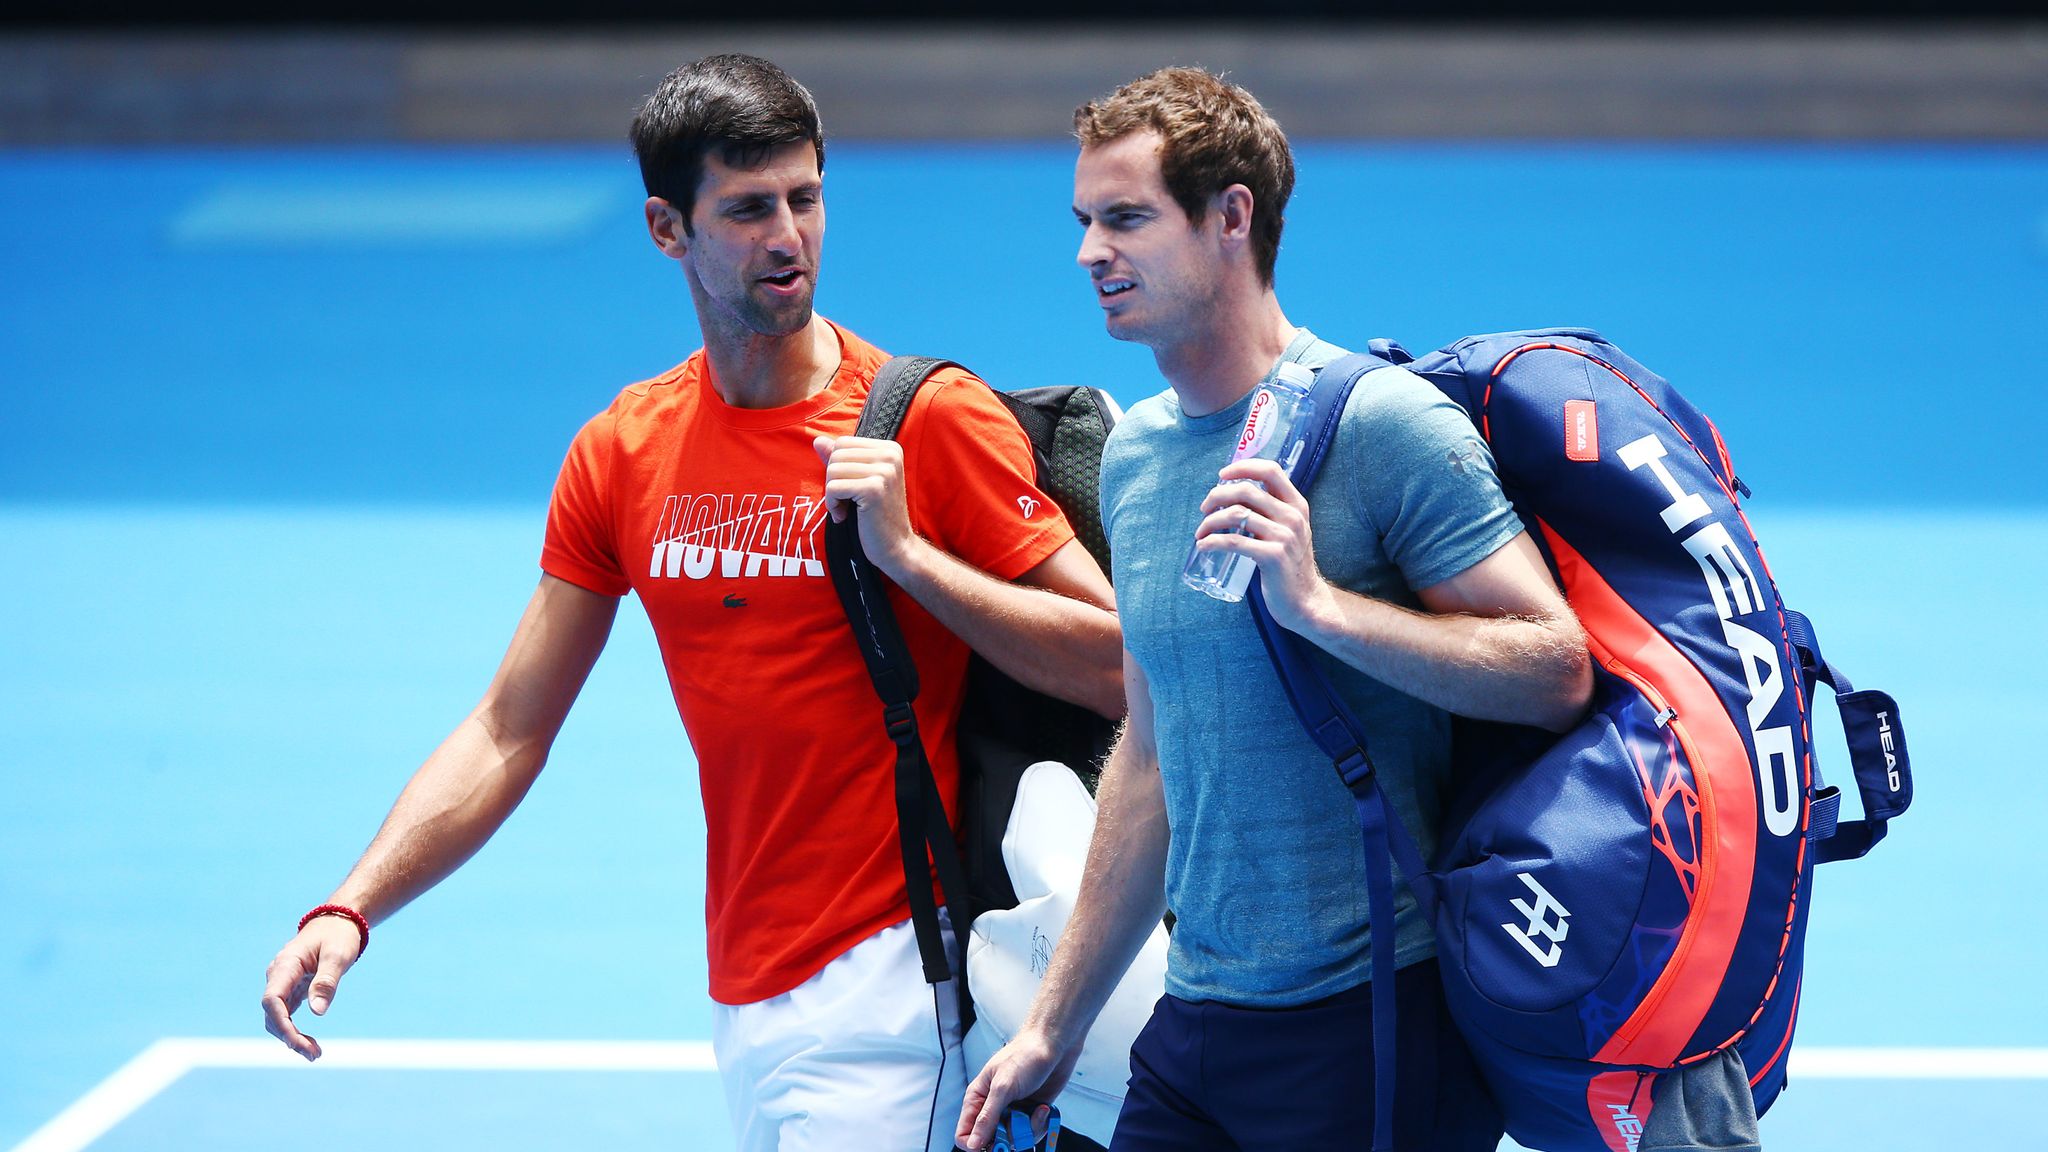 Novak Djokovic could not stomach some of the bits from the documentary of Andy Murray